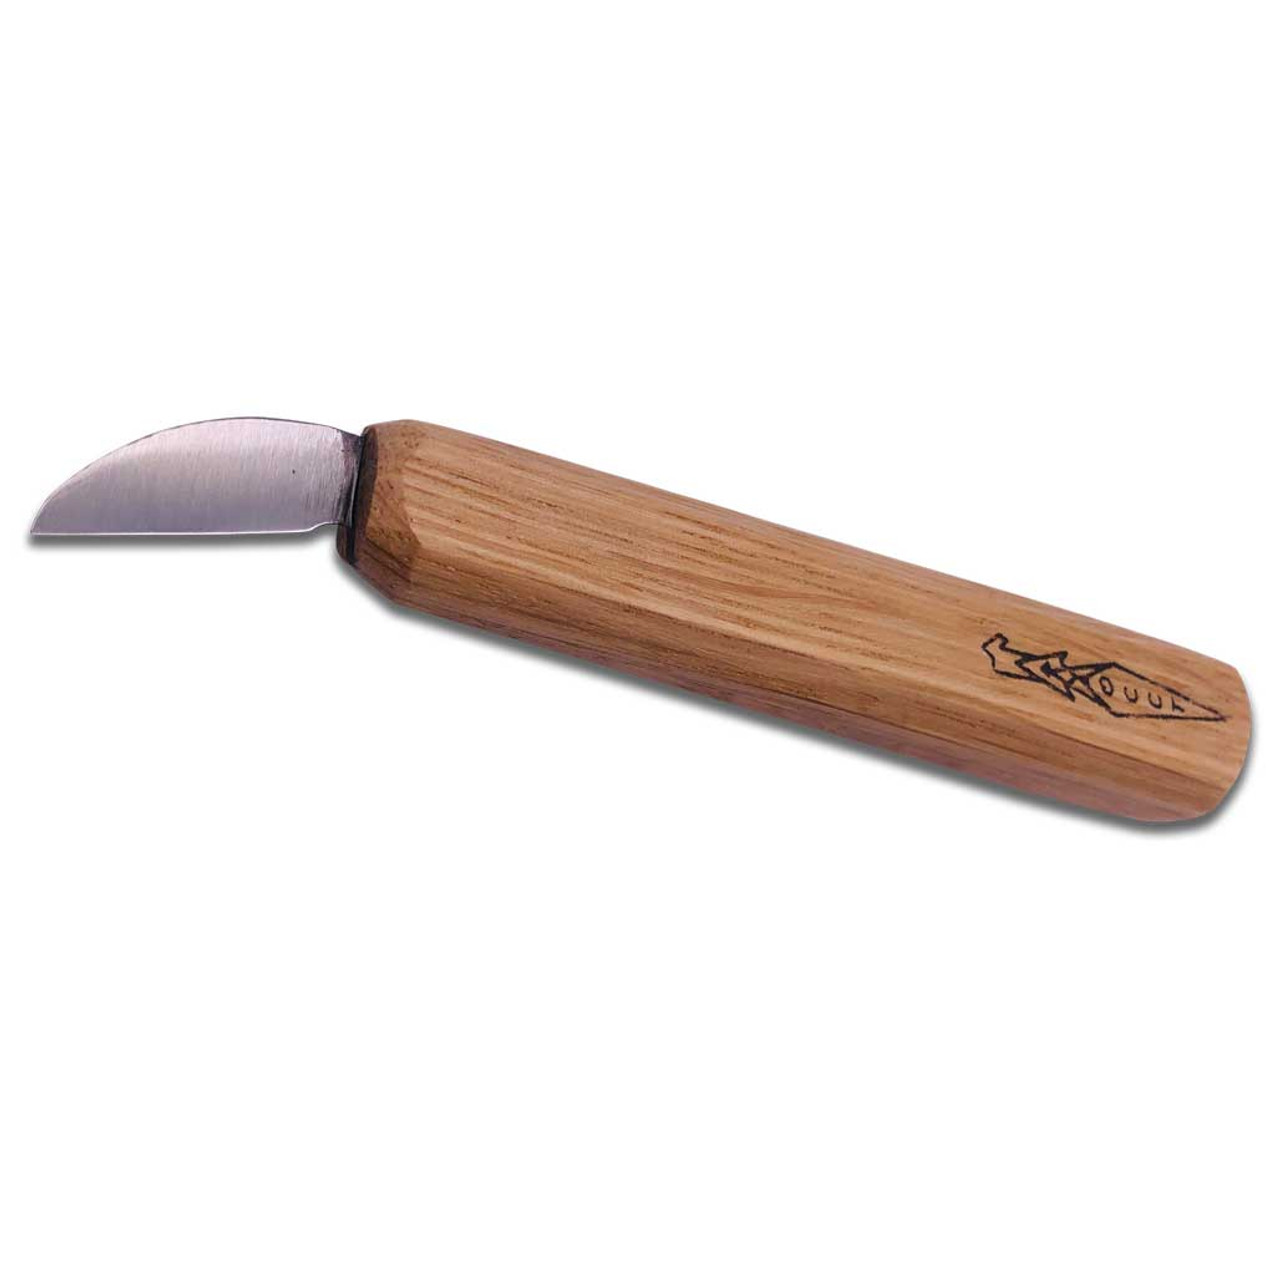 OCC 1 Chip Carving Knife - Knives for Sale